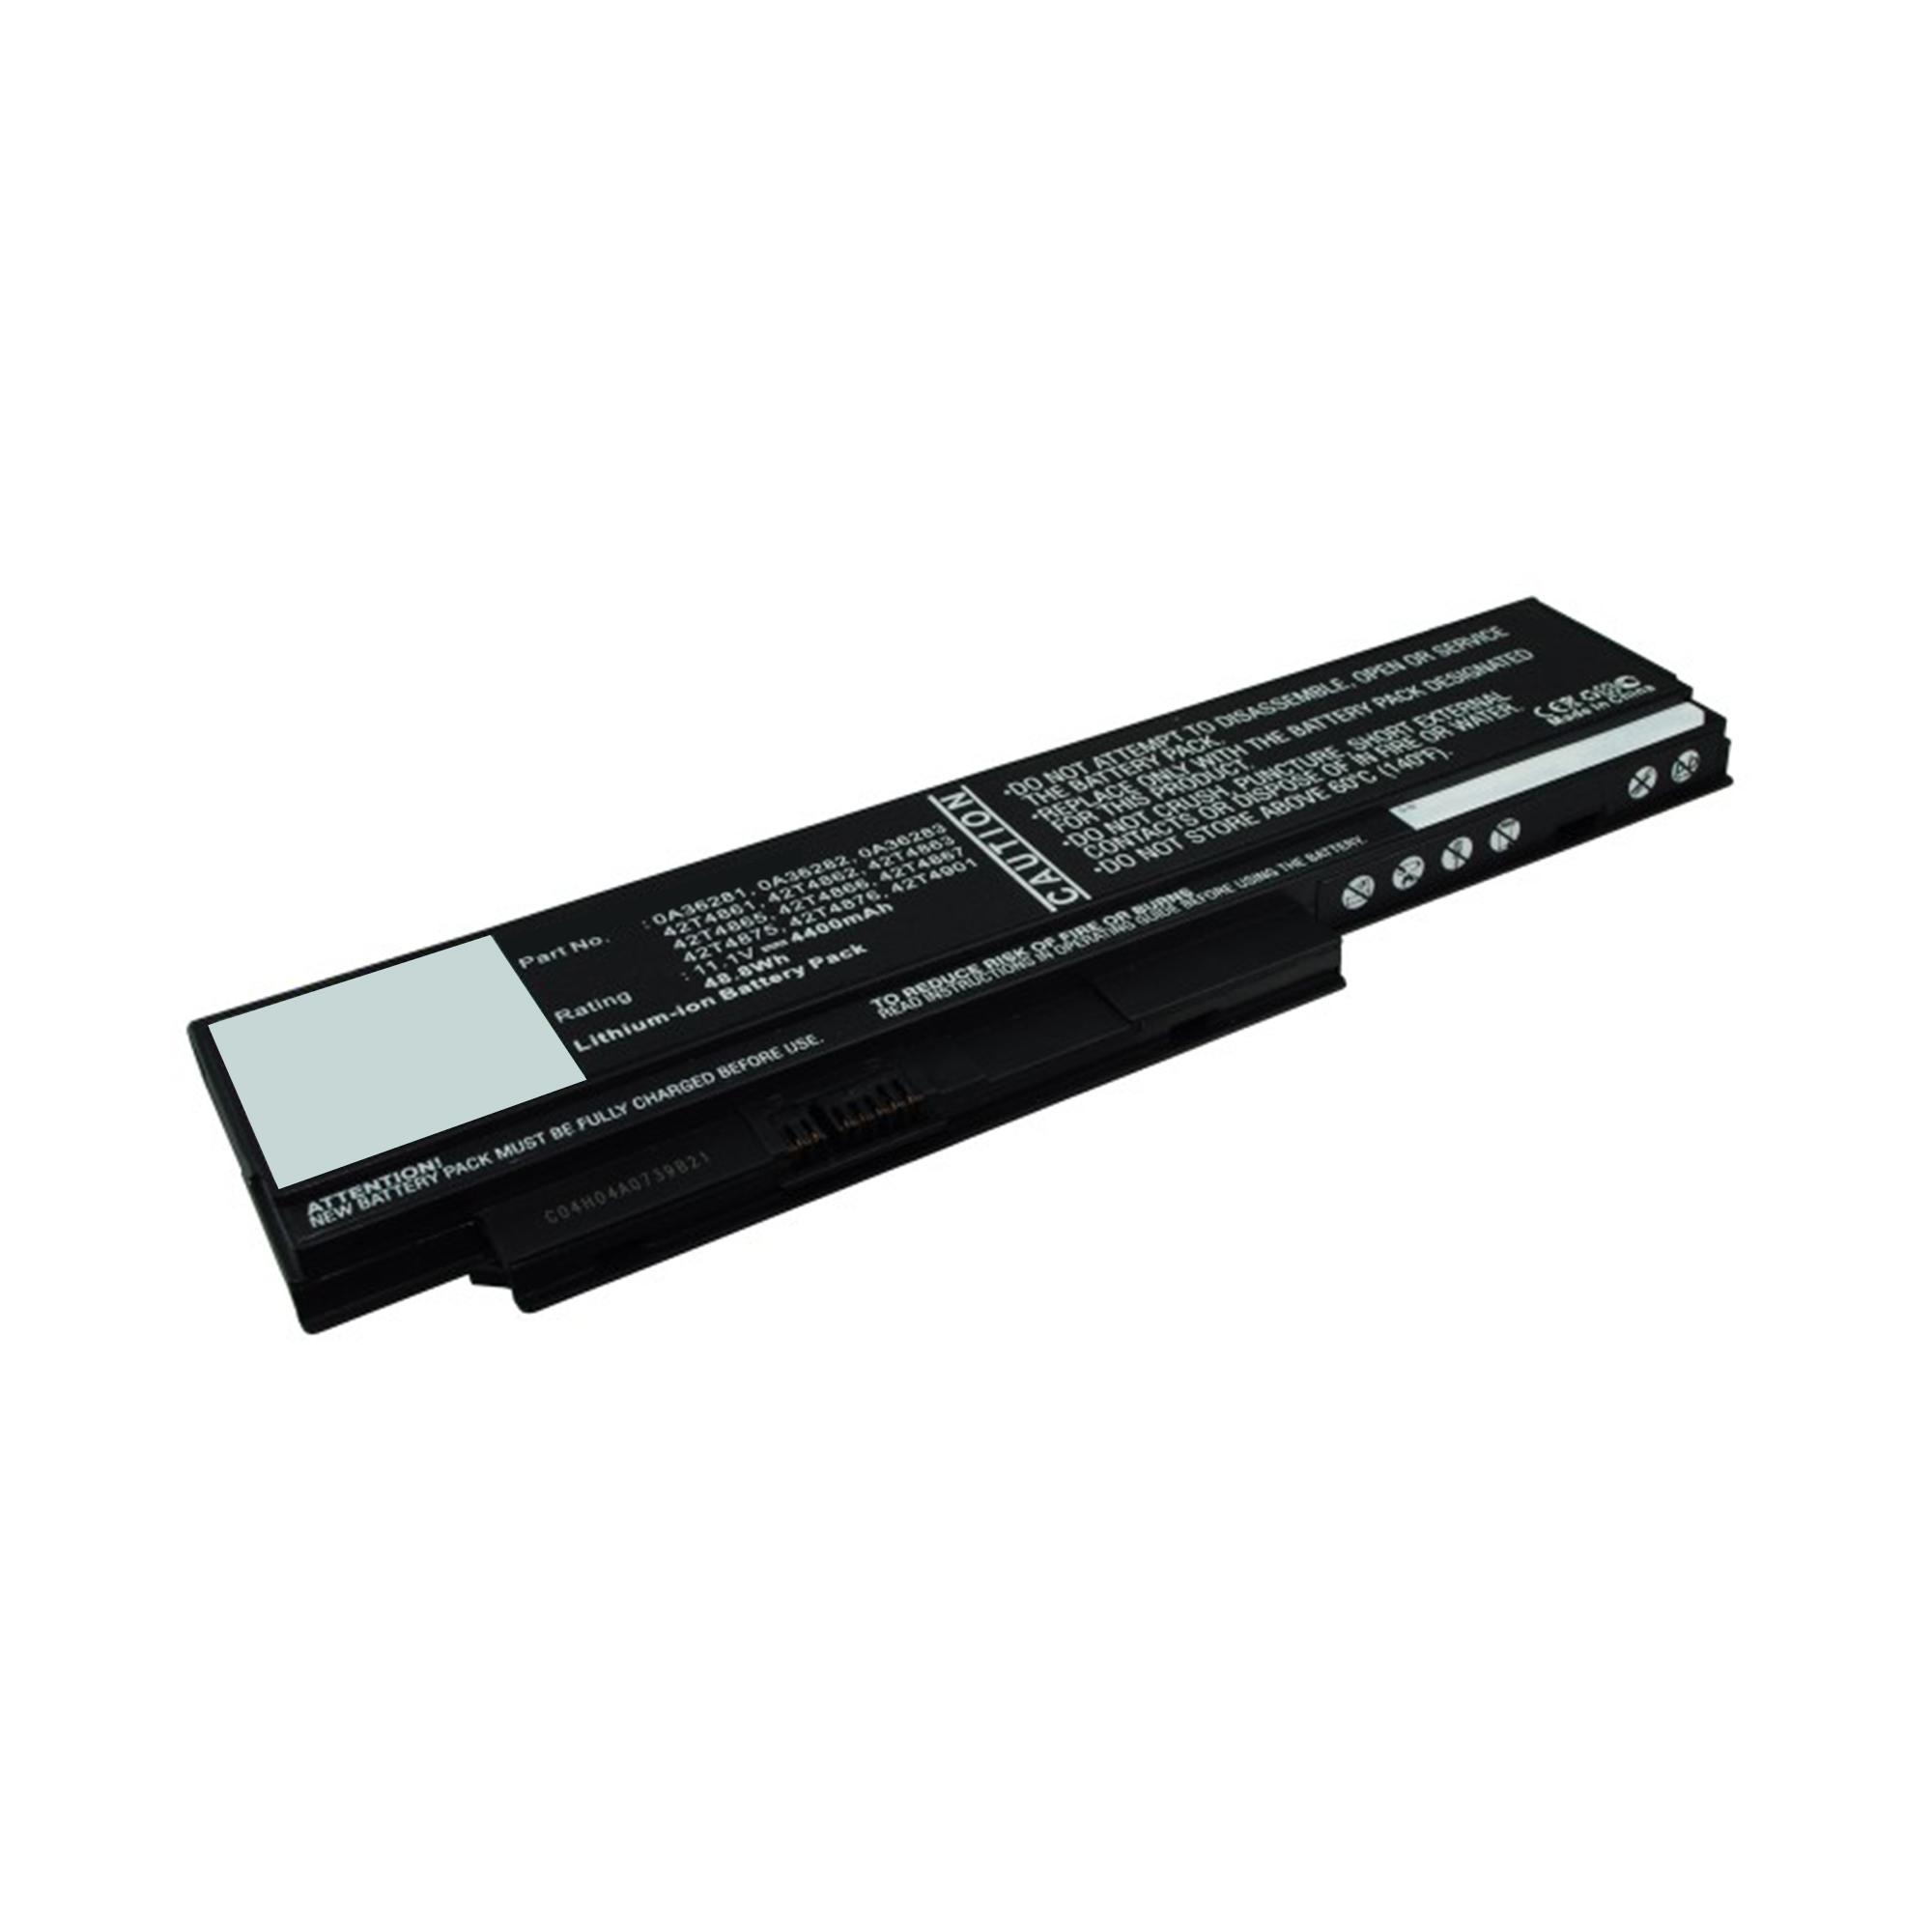 Synergy Digital Laptop Battery, Compatible with IBM 42T4861 Laptop Battery (Li-ion, 11.1V, 4400mAh)